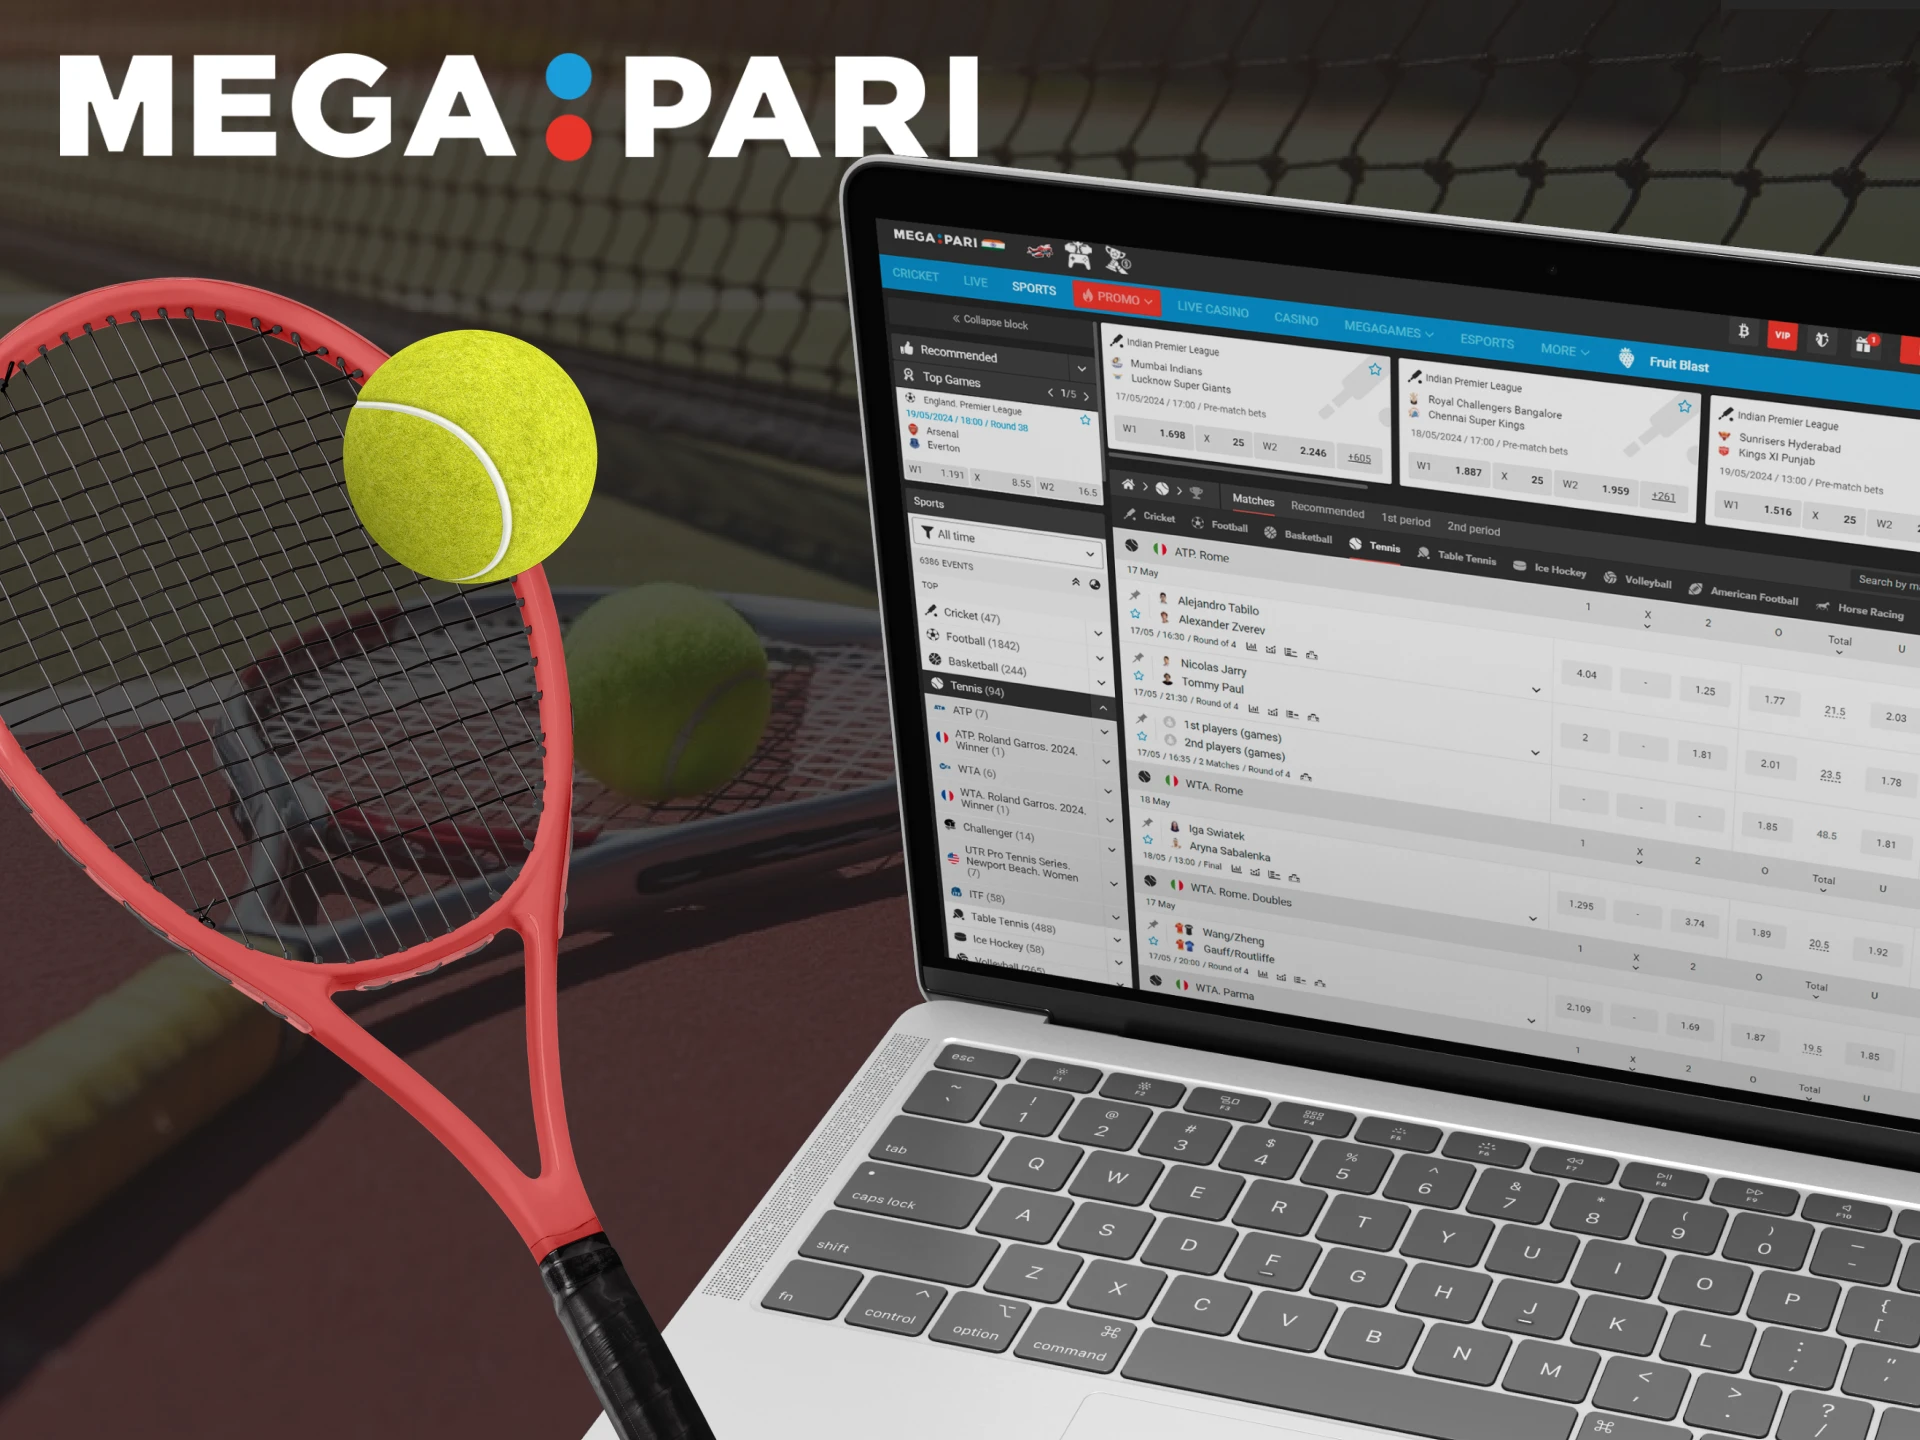 If you are a tennis fan, visit the relevant section of the Megapari site to find the match you want to bet on.